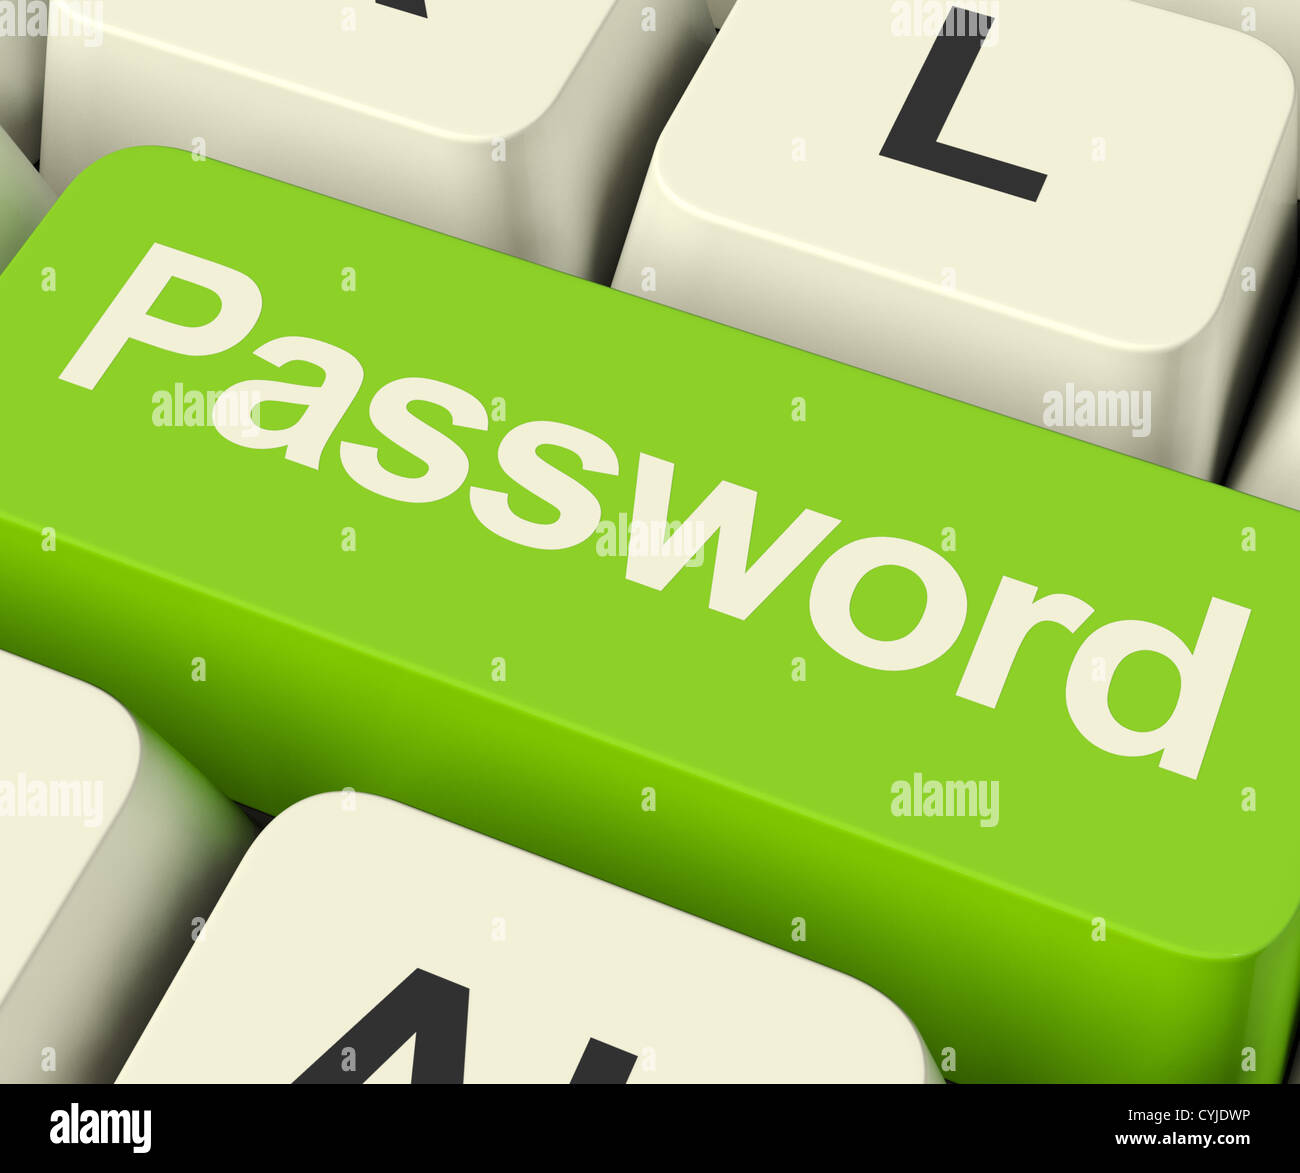 Password Computer Key In Green Shows Permission And Security Stock Photo